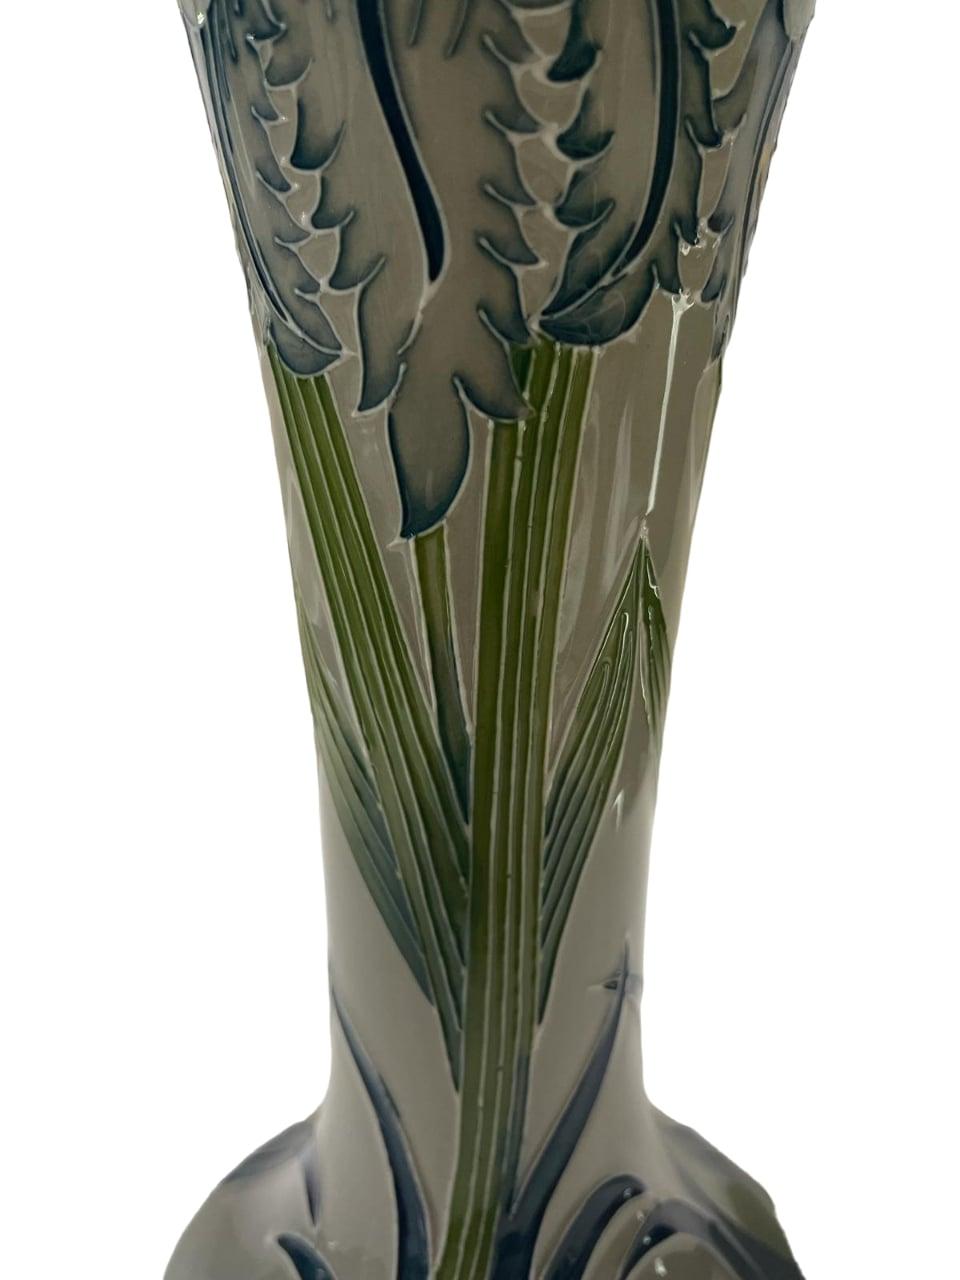 A contemporary Moorcroft Green Iris pattern slender tapering cylindrical vase, 2013 Centennial Relaunch of William Moorcroft's 1913 design.
From the Legacy collection. Dated 2013, numbered edition 229.
BOXED

Size: 8.2 inches

Good condition